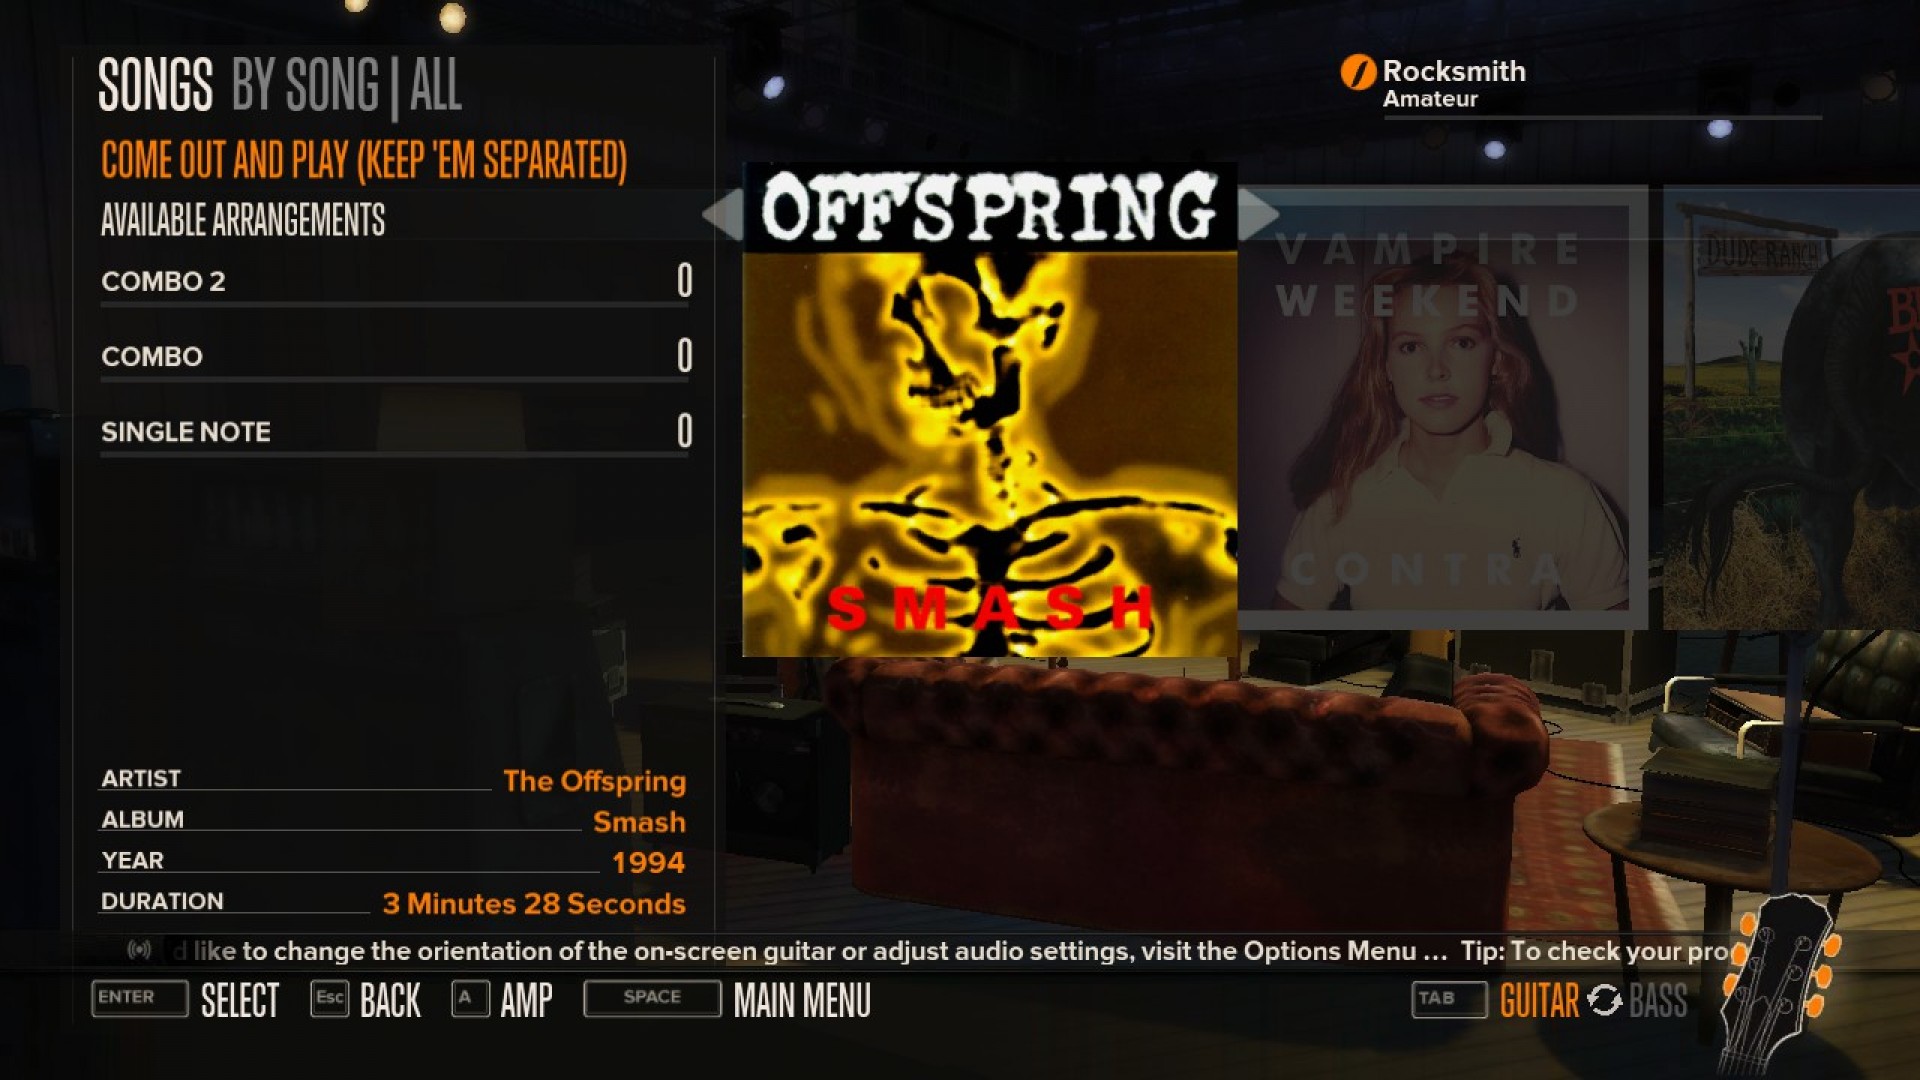 Rocksmith - The Offspring - Come Out and Play screenshot